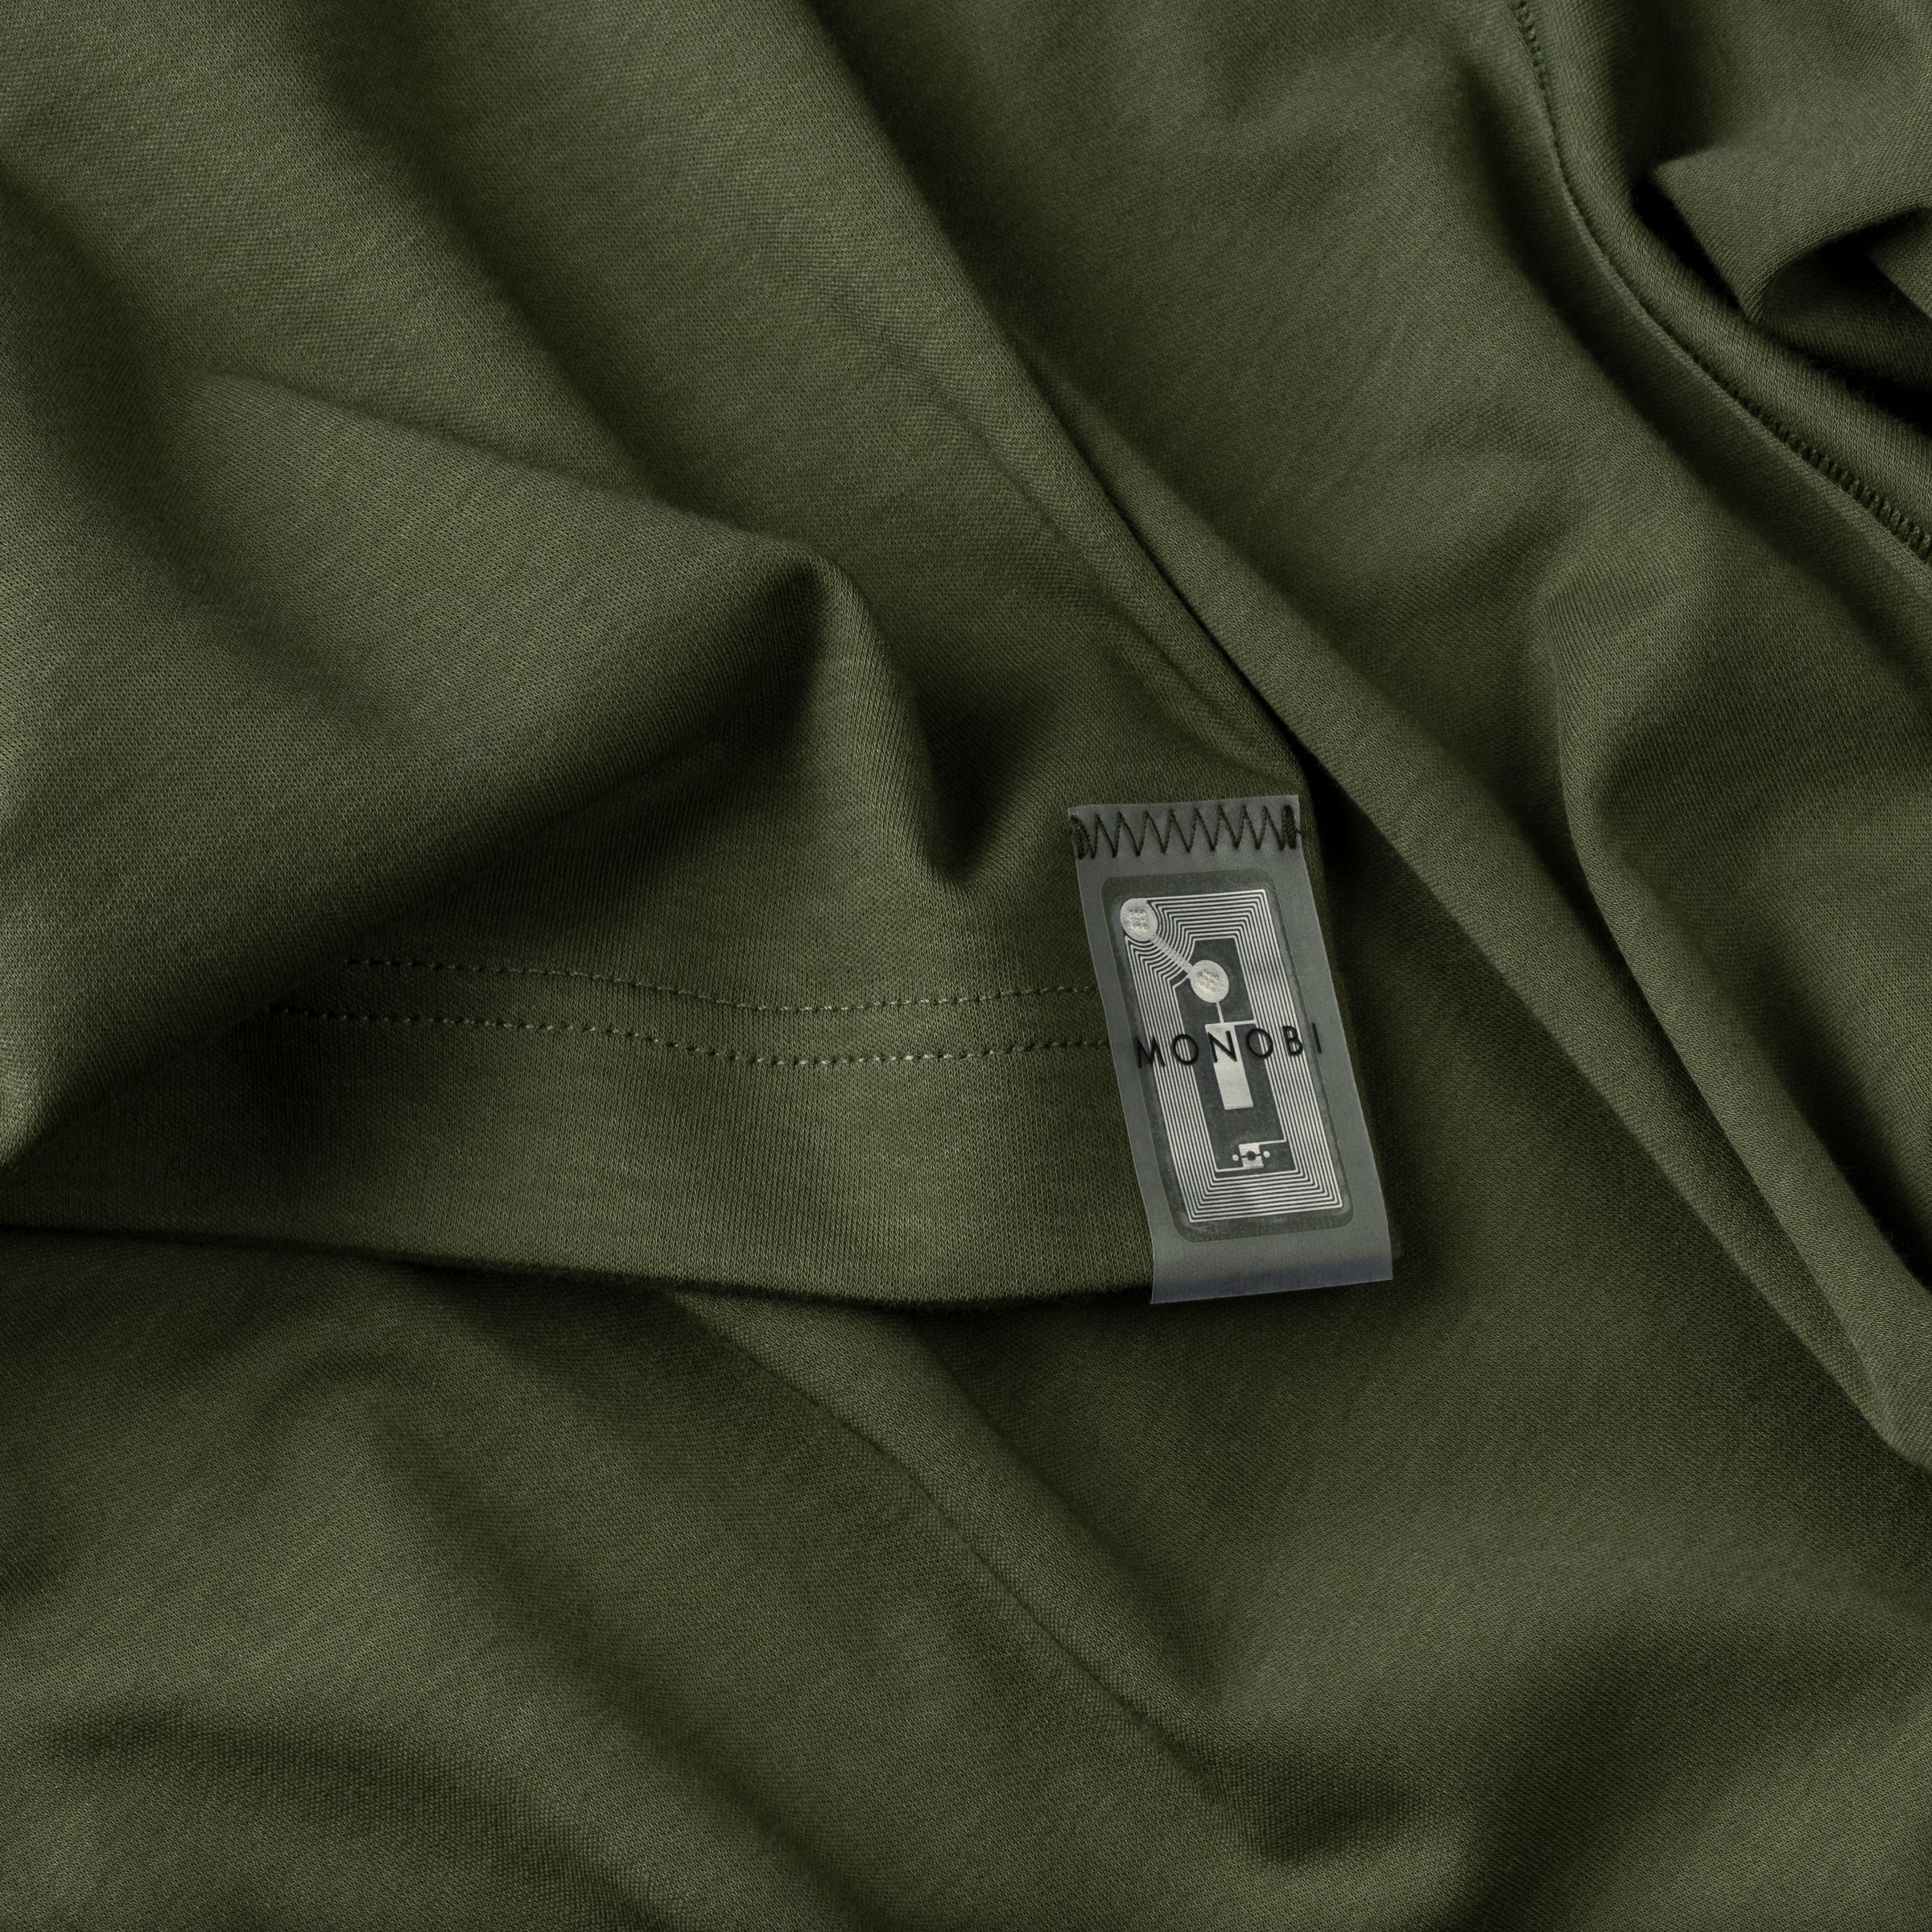 Detail of the tag sewn on the back of the green Icy Touch Tshirt